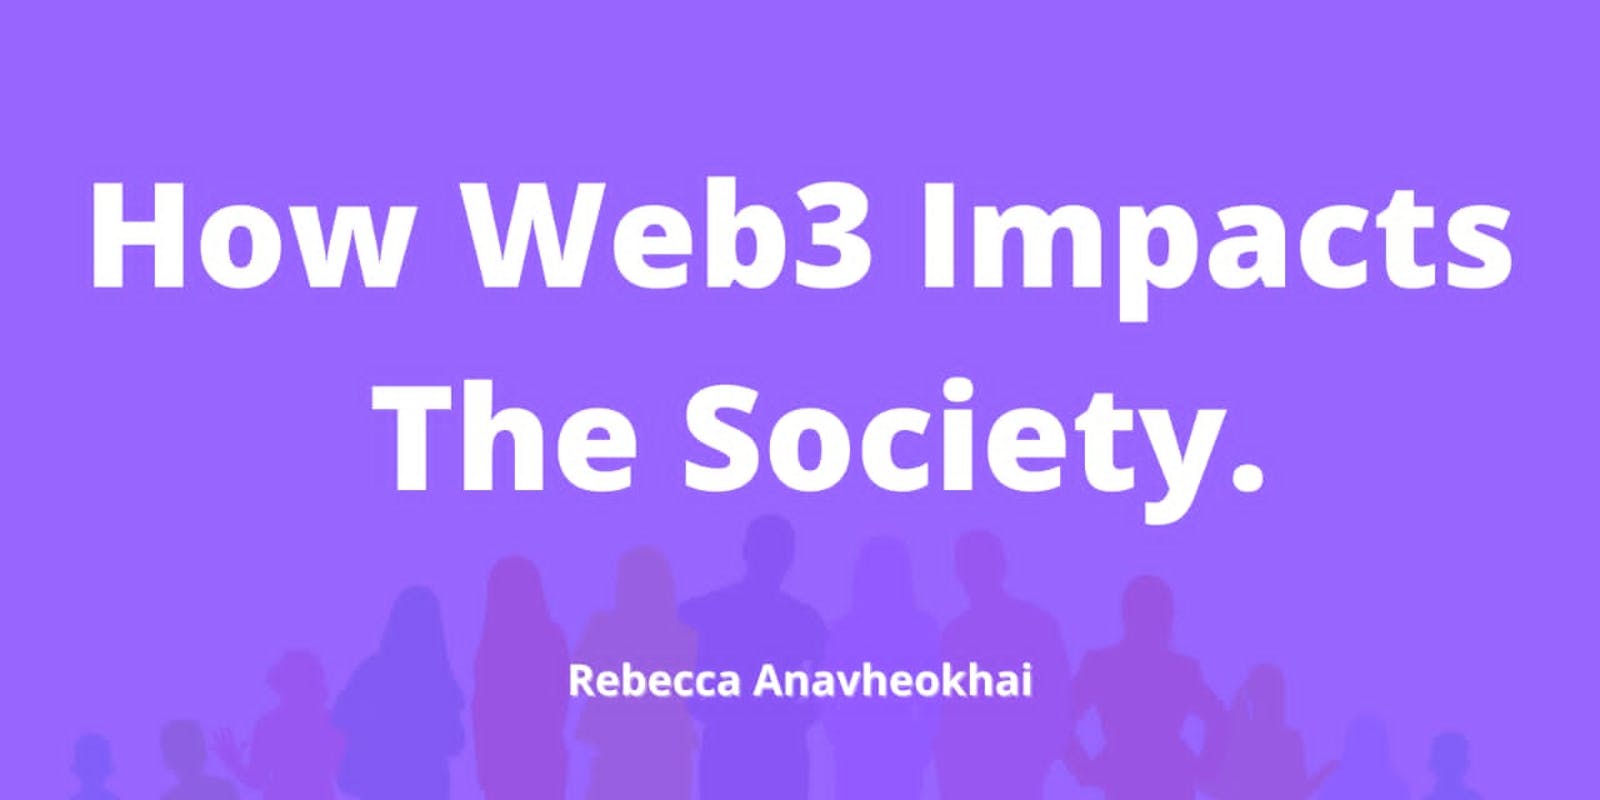 How Web3 Impacts The Society.